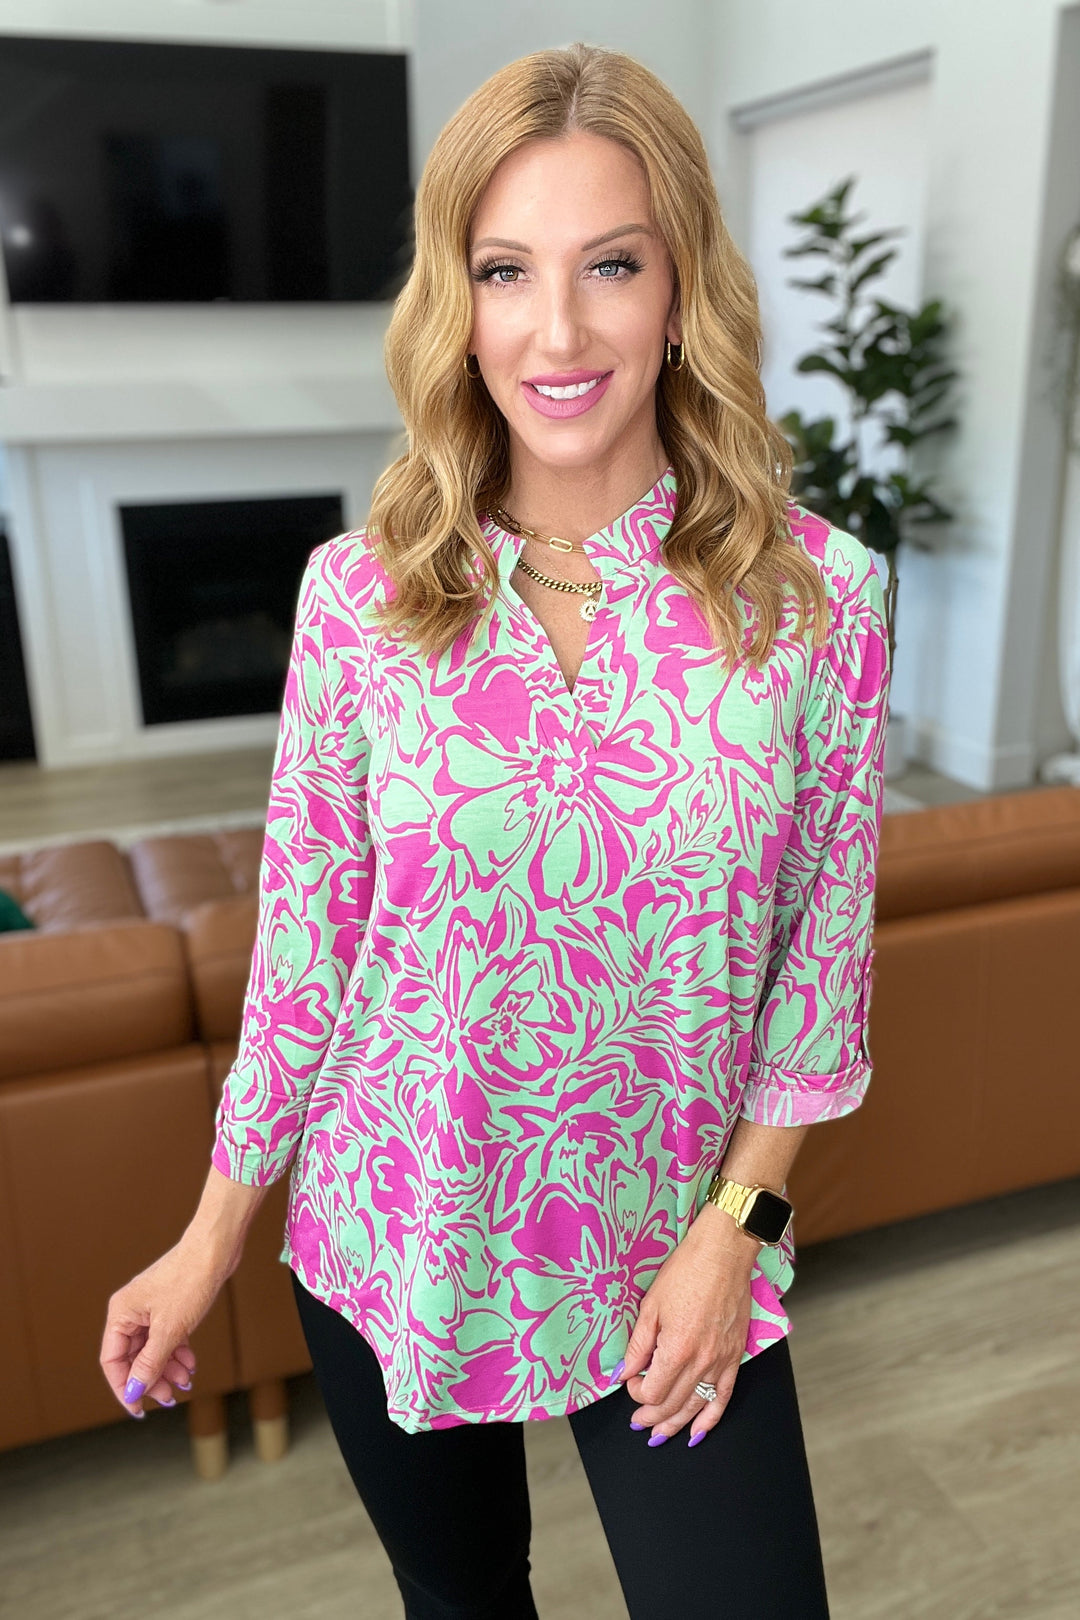 Lizzy 3/4 Sleeve Top - Emerald Pink Floral